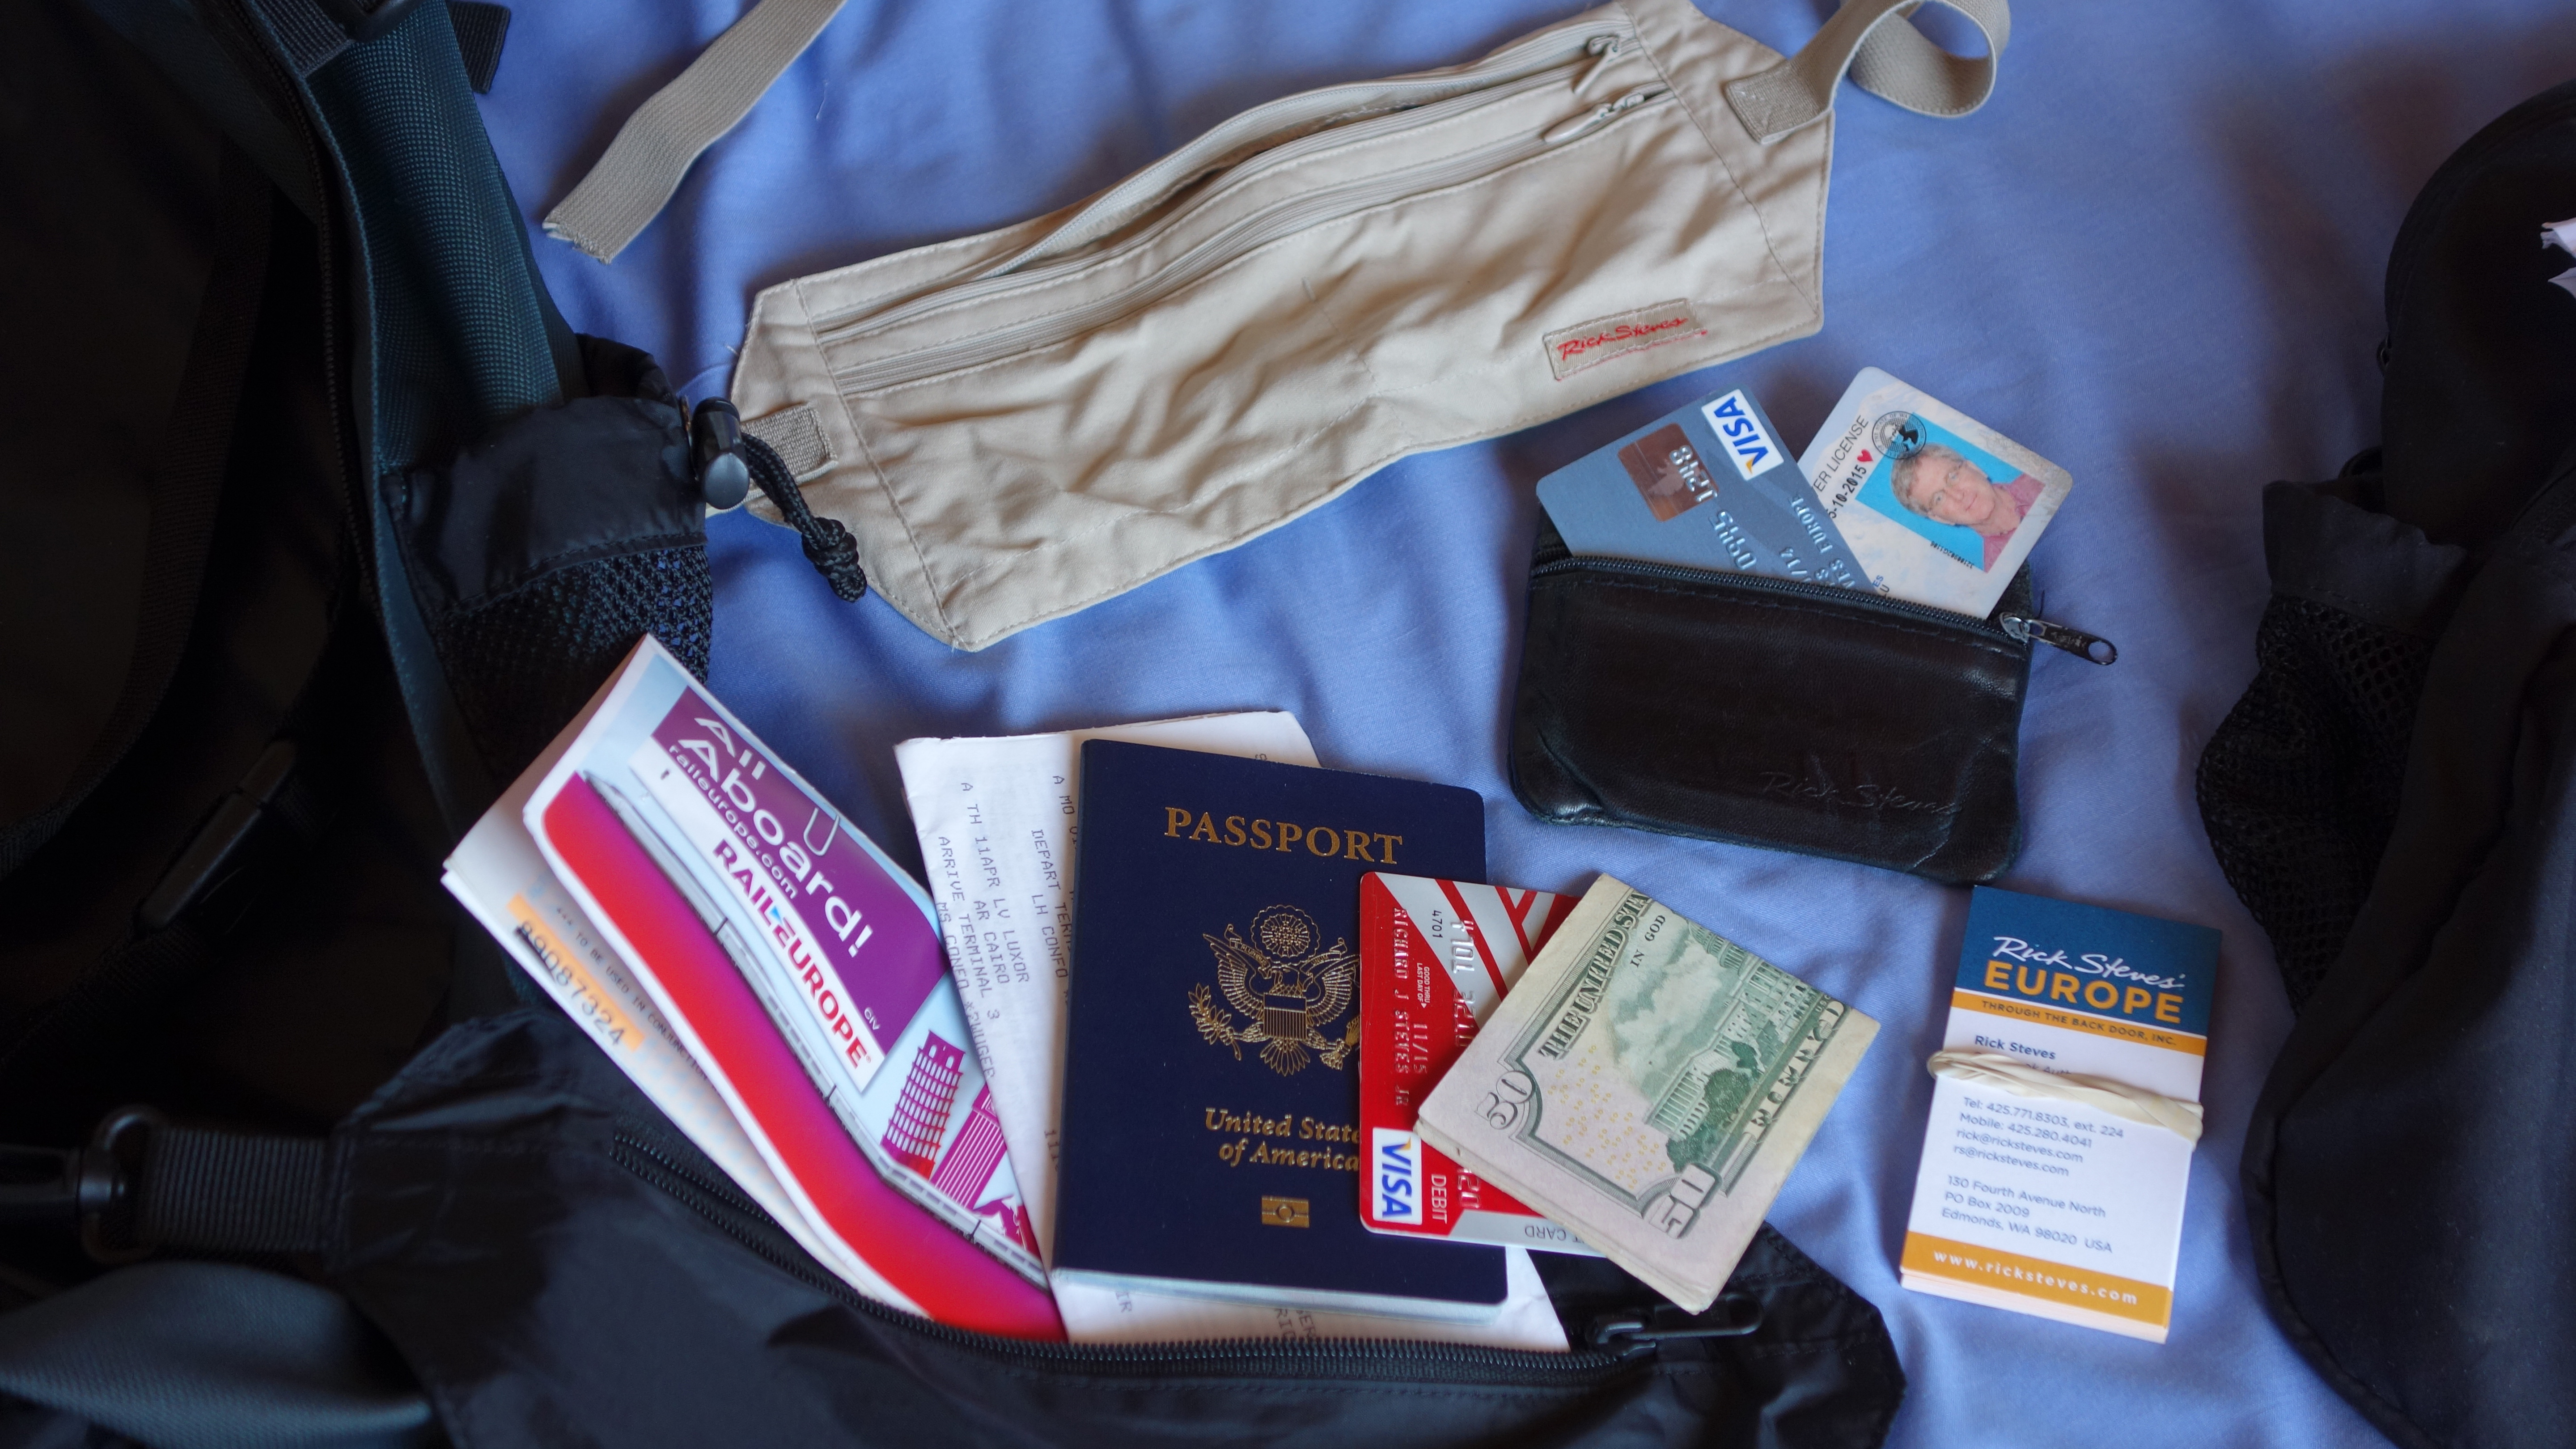 Why You Should Never Travel Without a Money Belt, According to Rick Steves